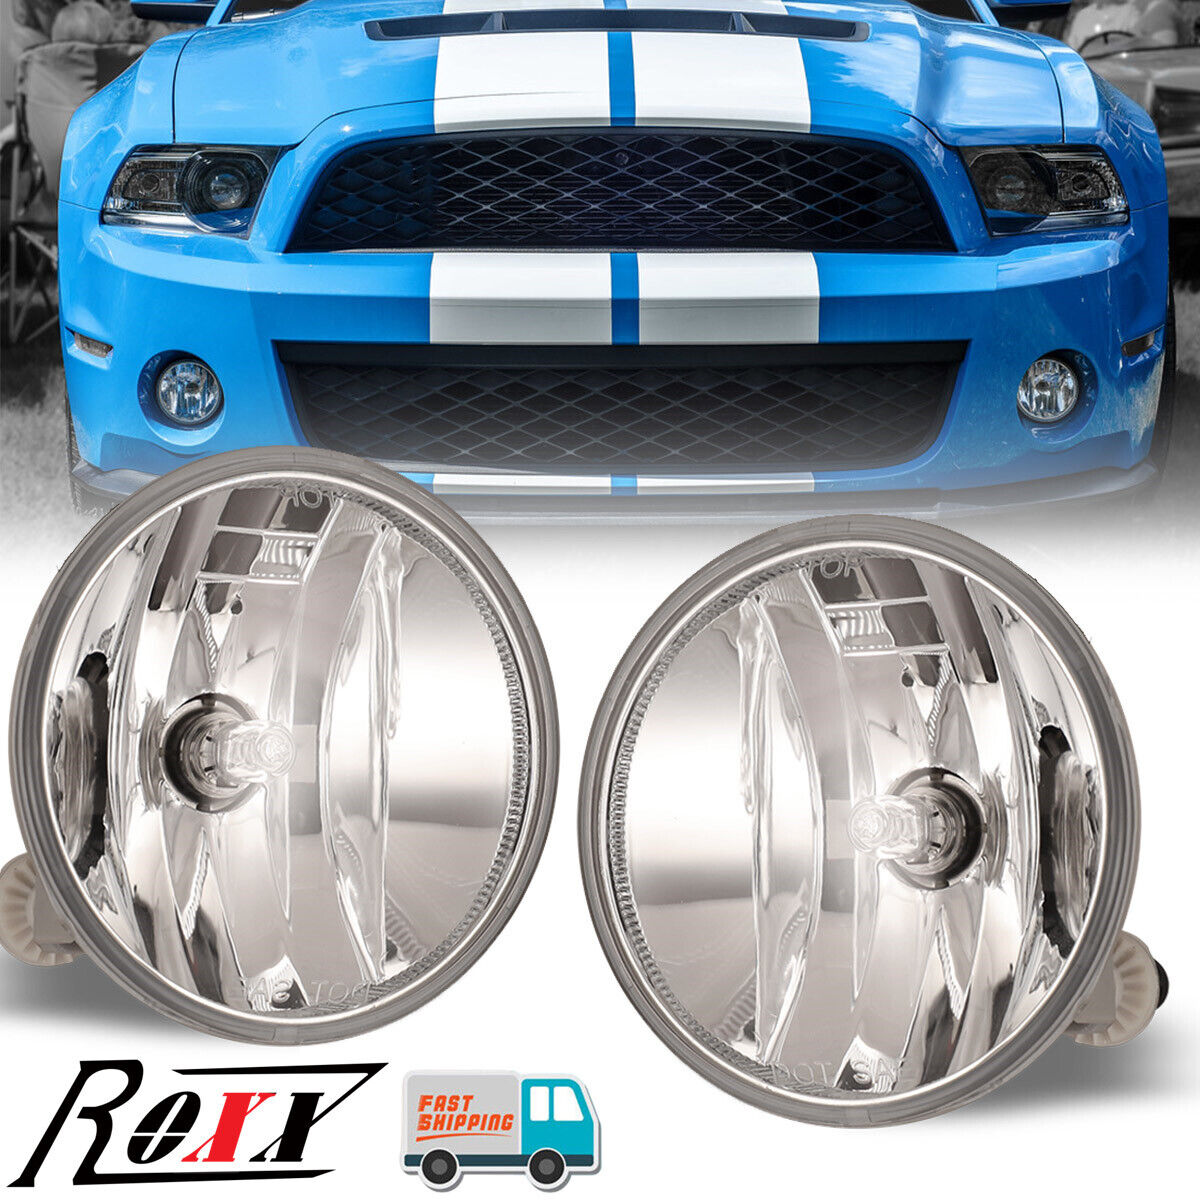 For 2007-2009 Ford Mustang Shelby GT500 Fog lights Bumper Lamps Replacement Pair